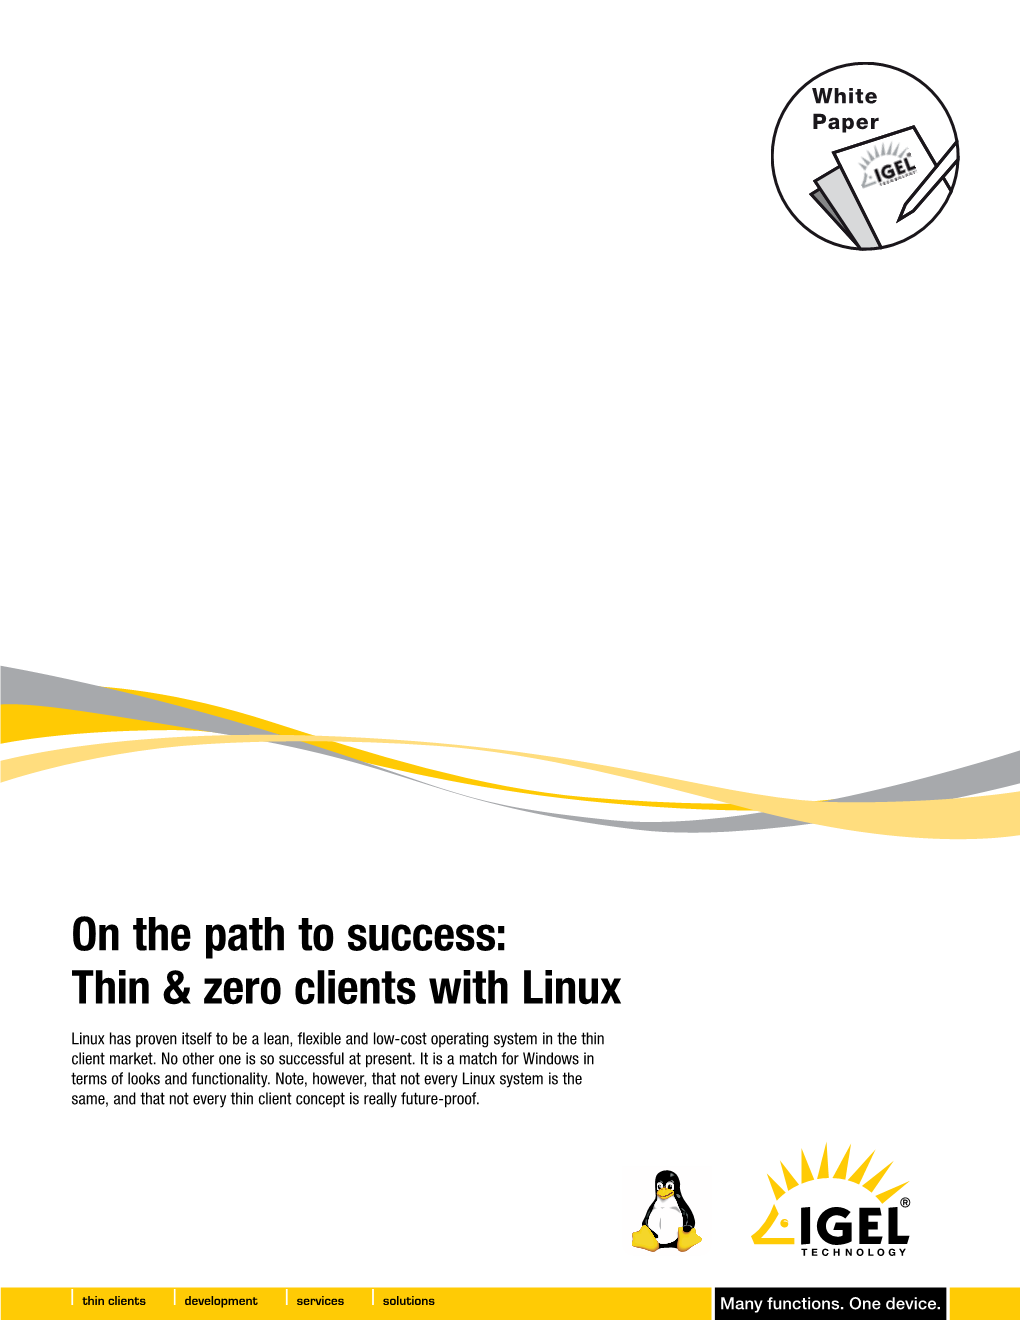 On the Path to Success: Thin & Zero Clients with Linux